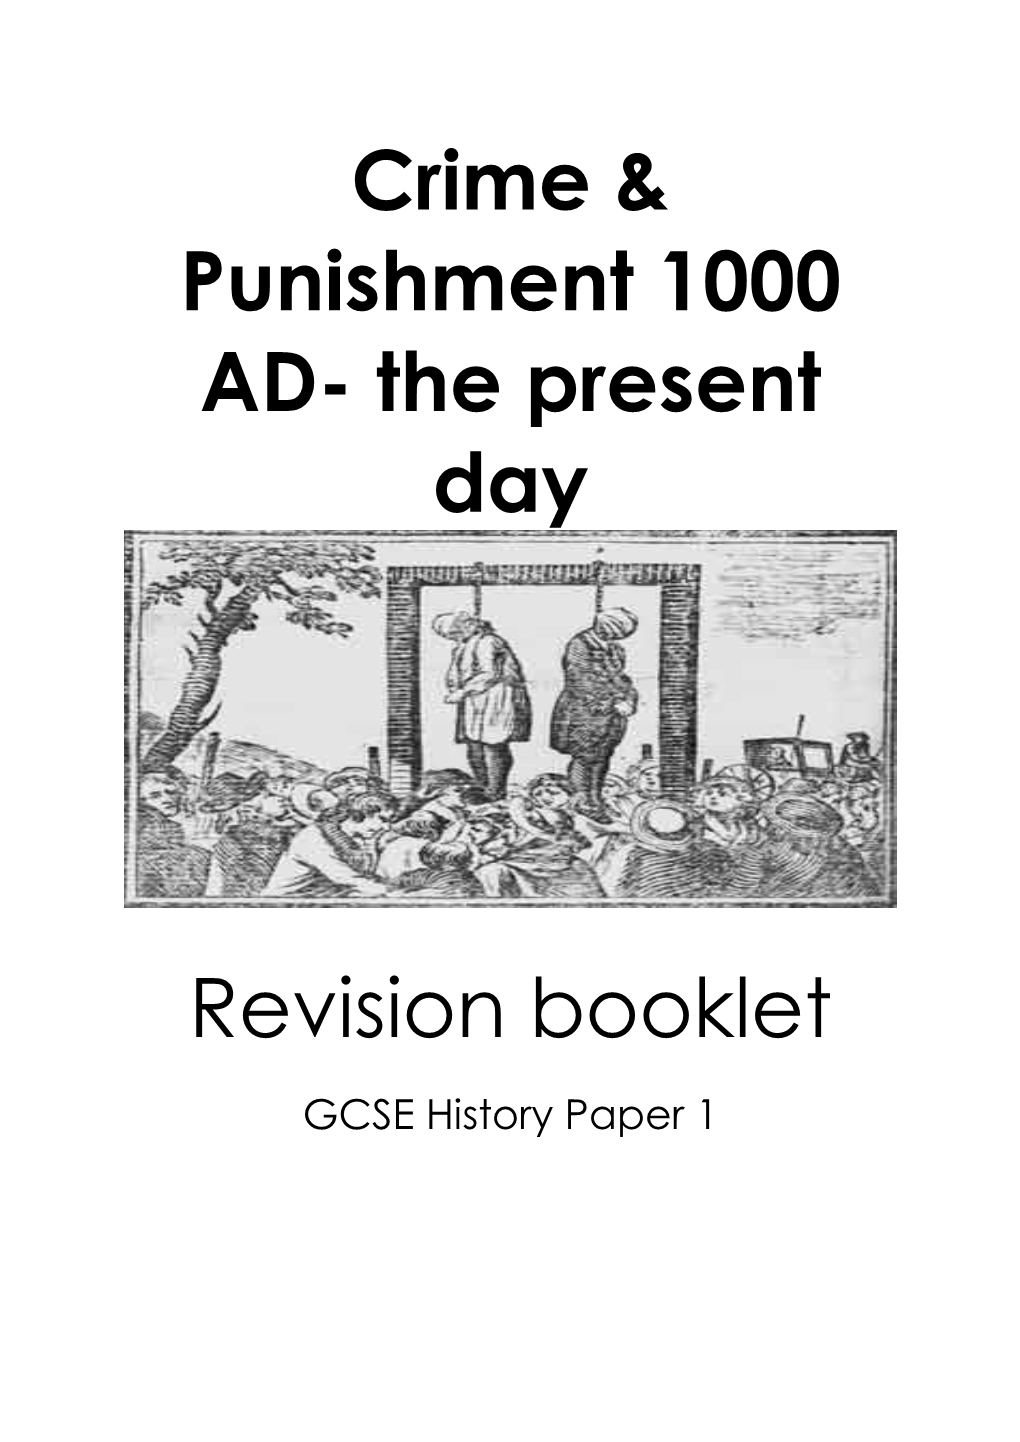 Crime & Punishment 1000 AD- the Present Day Revision Booklet